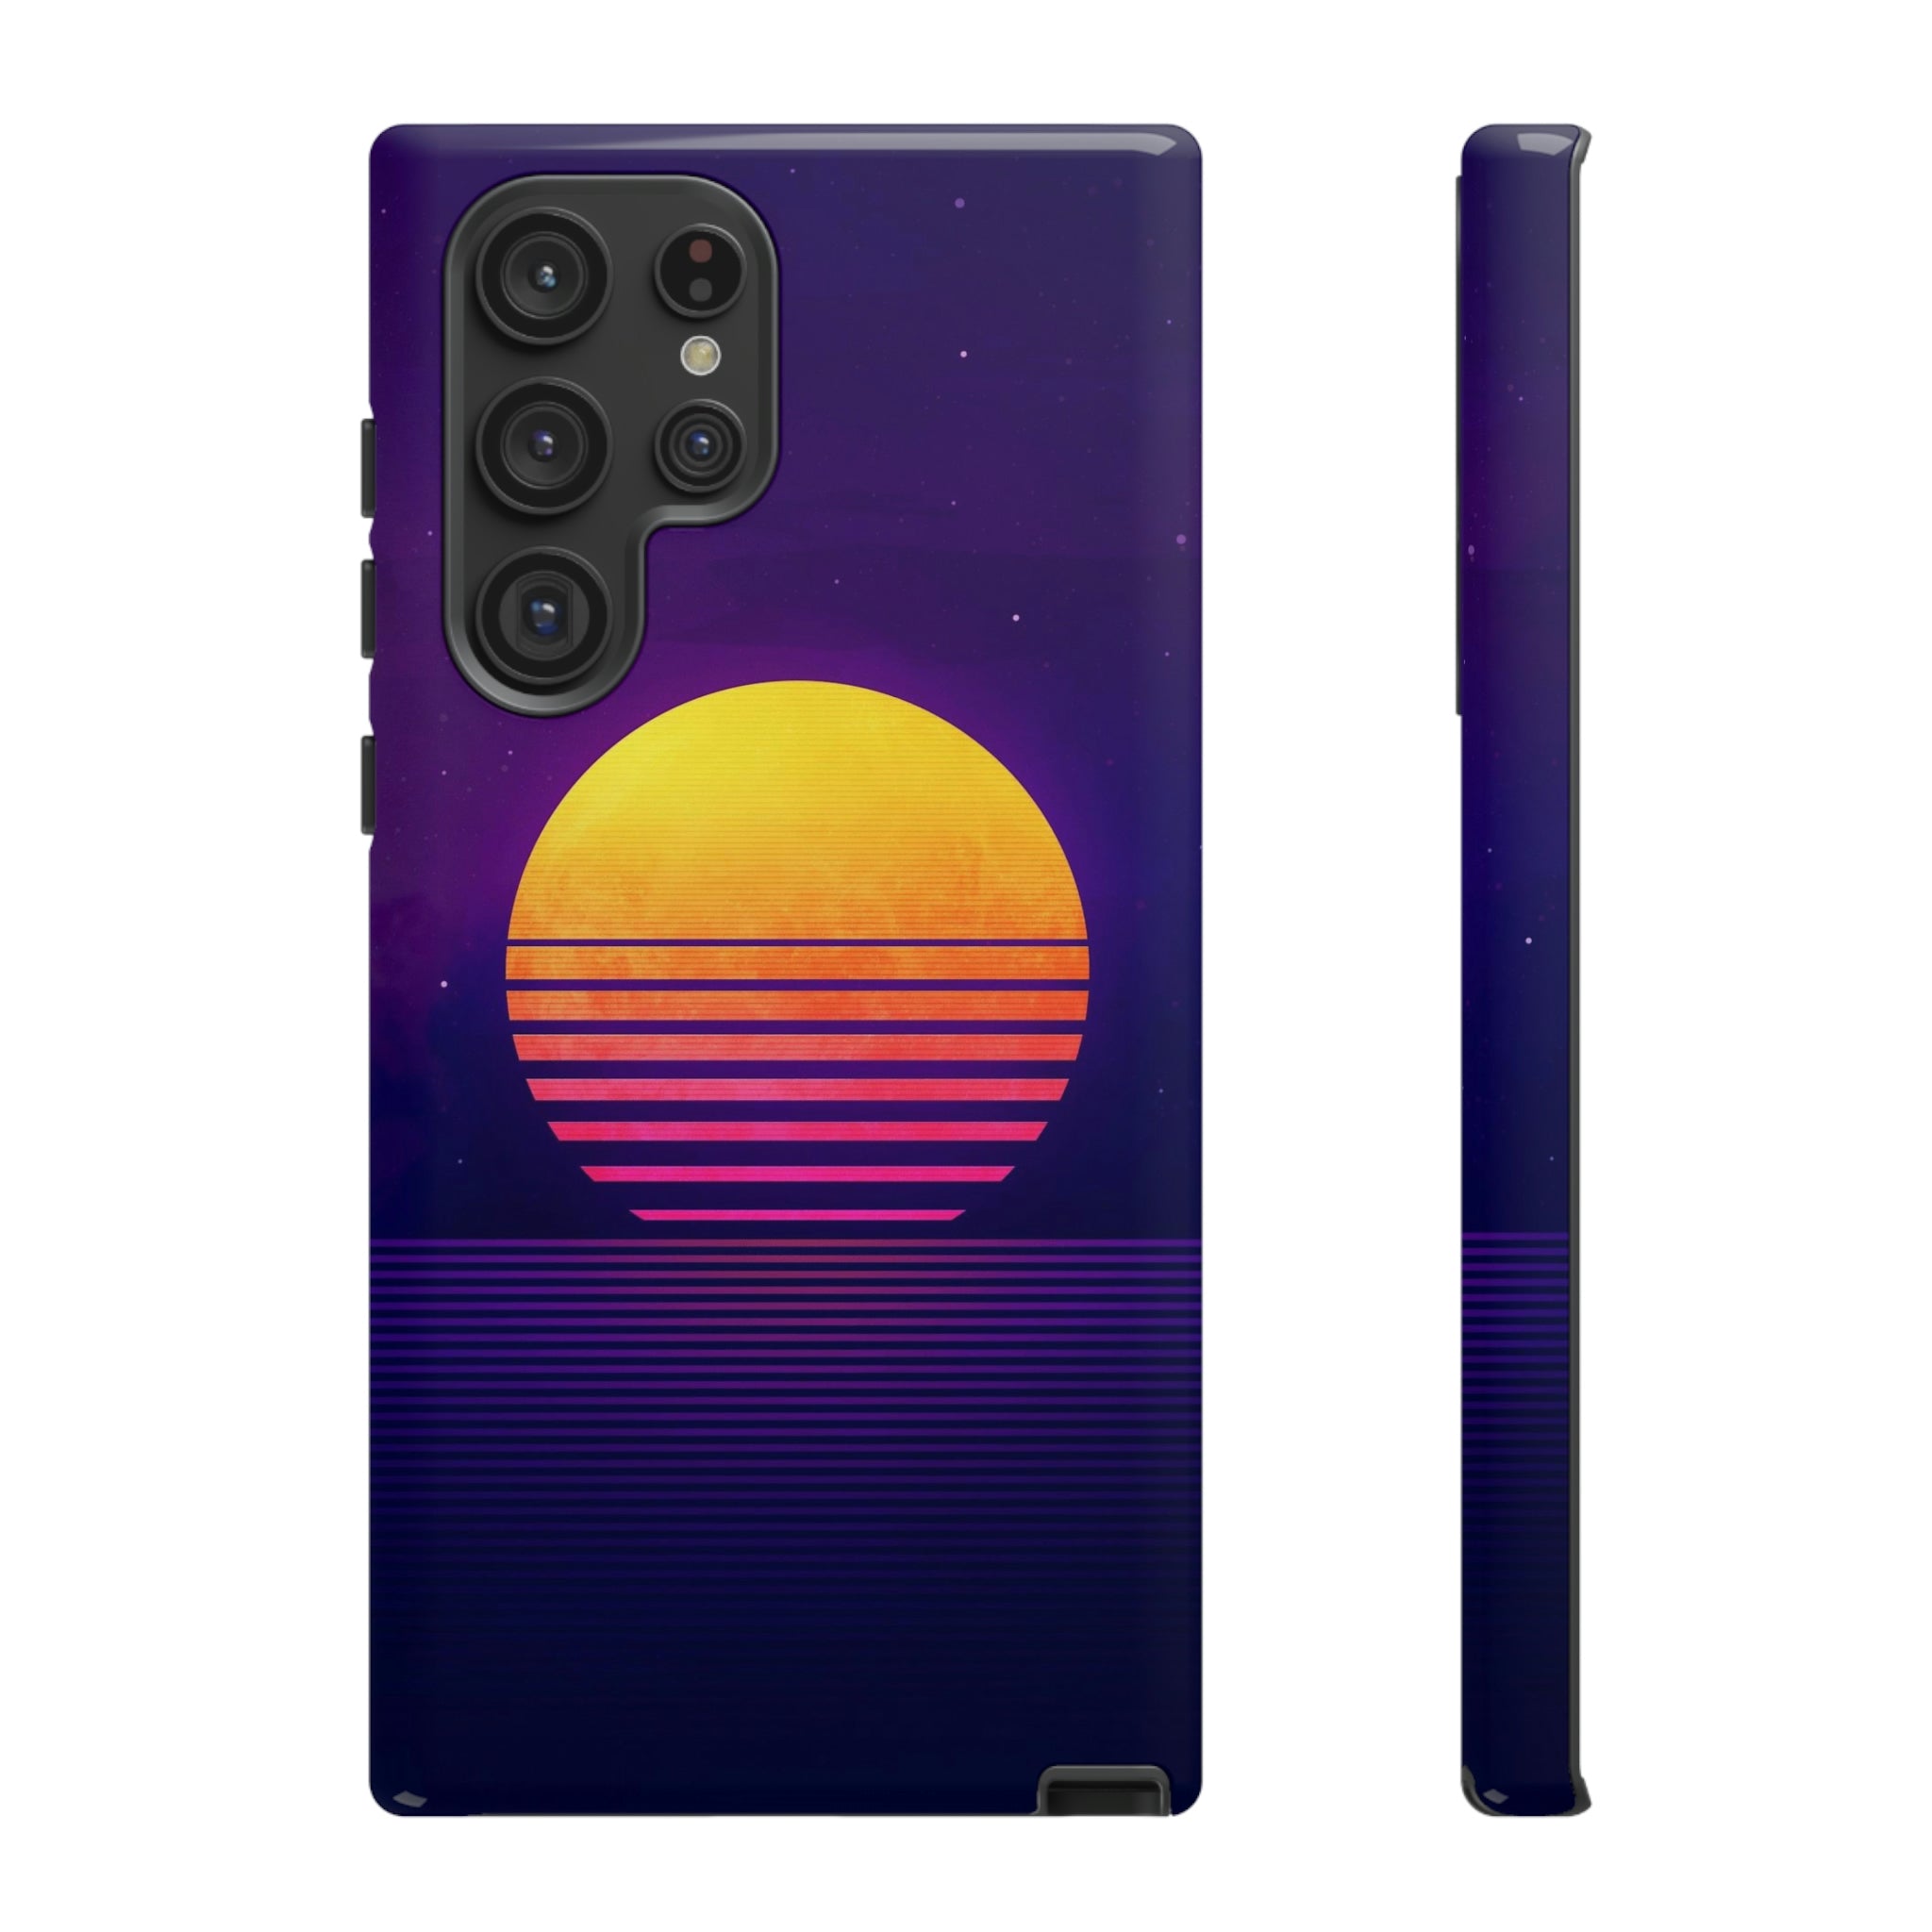 Retrowave Sunset - Dual Layered, Full Body, Armored Phone Case for iPhone 13/Samsung Galaxy S22/Google Pixel 6